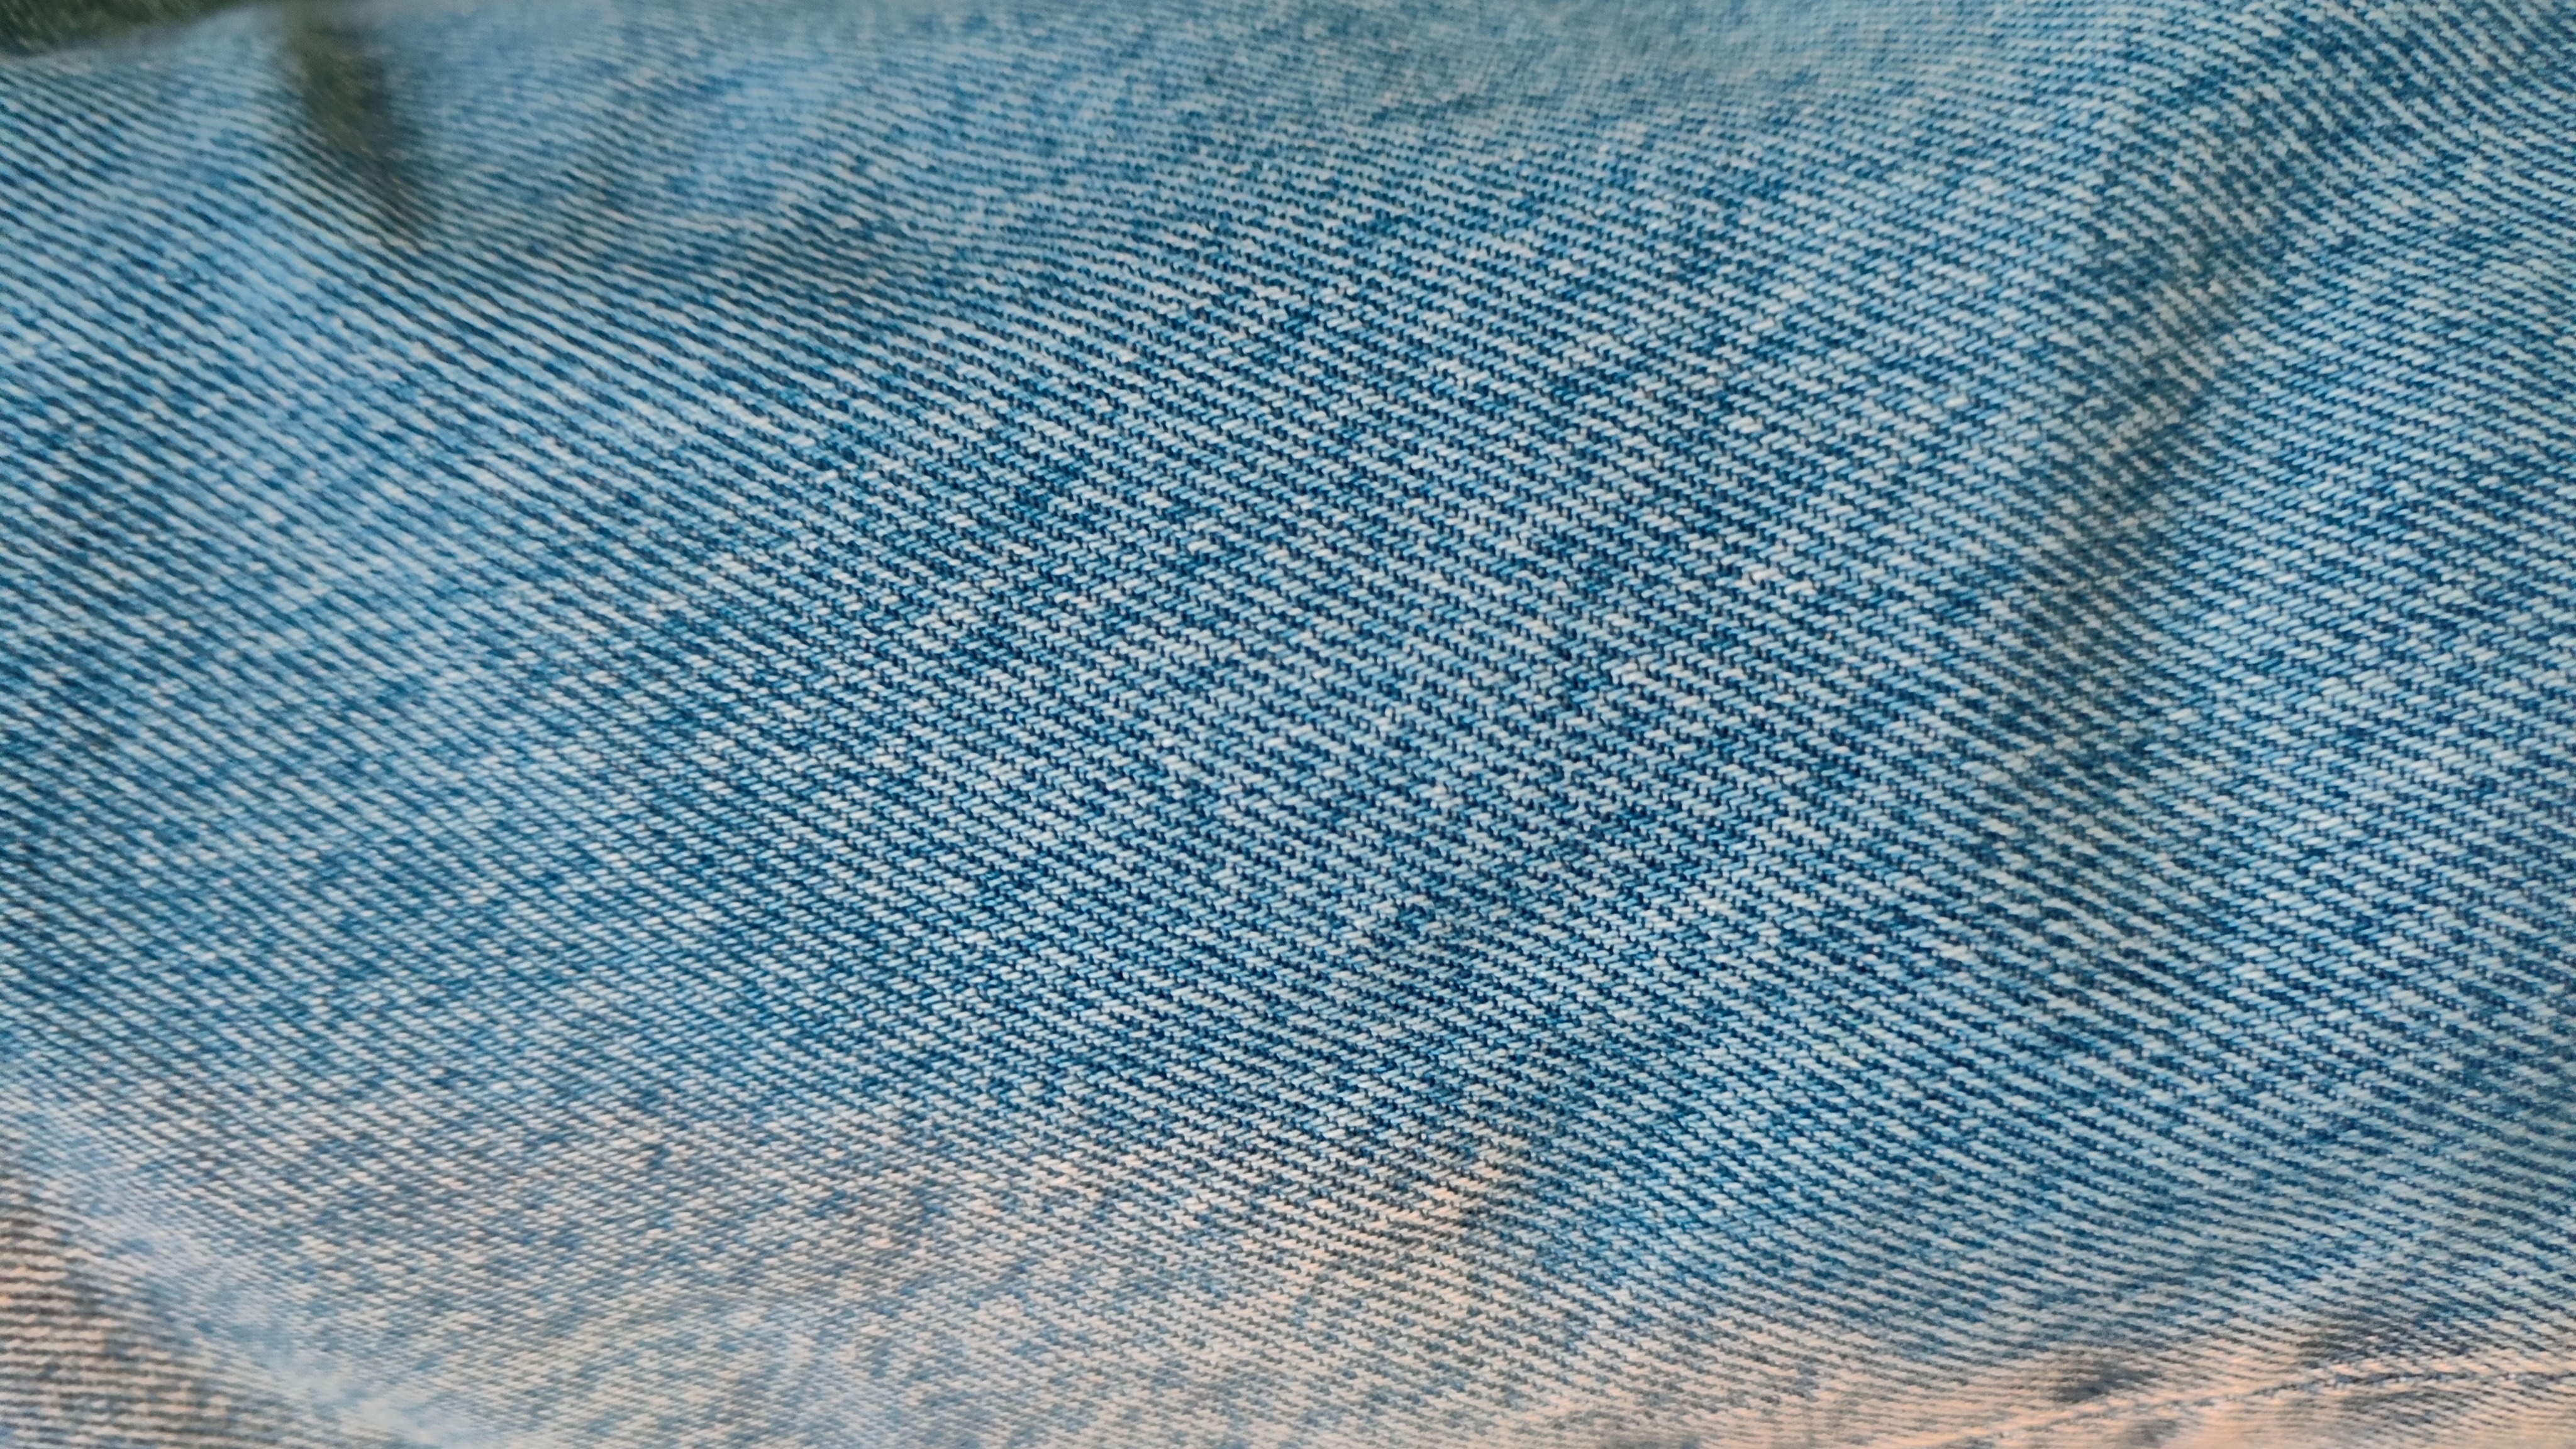 Picture of a pair of jeans taken using the Realme GT 2 Pro